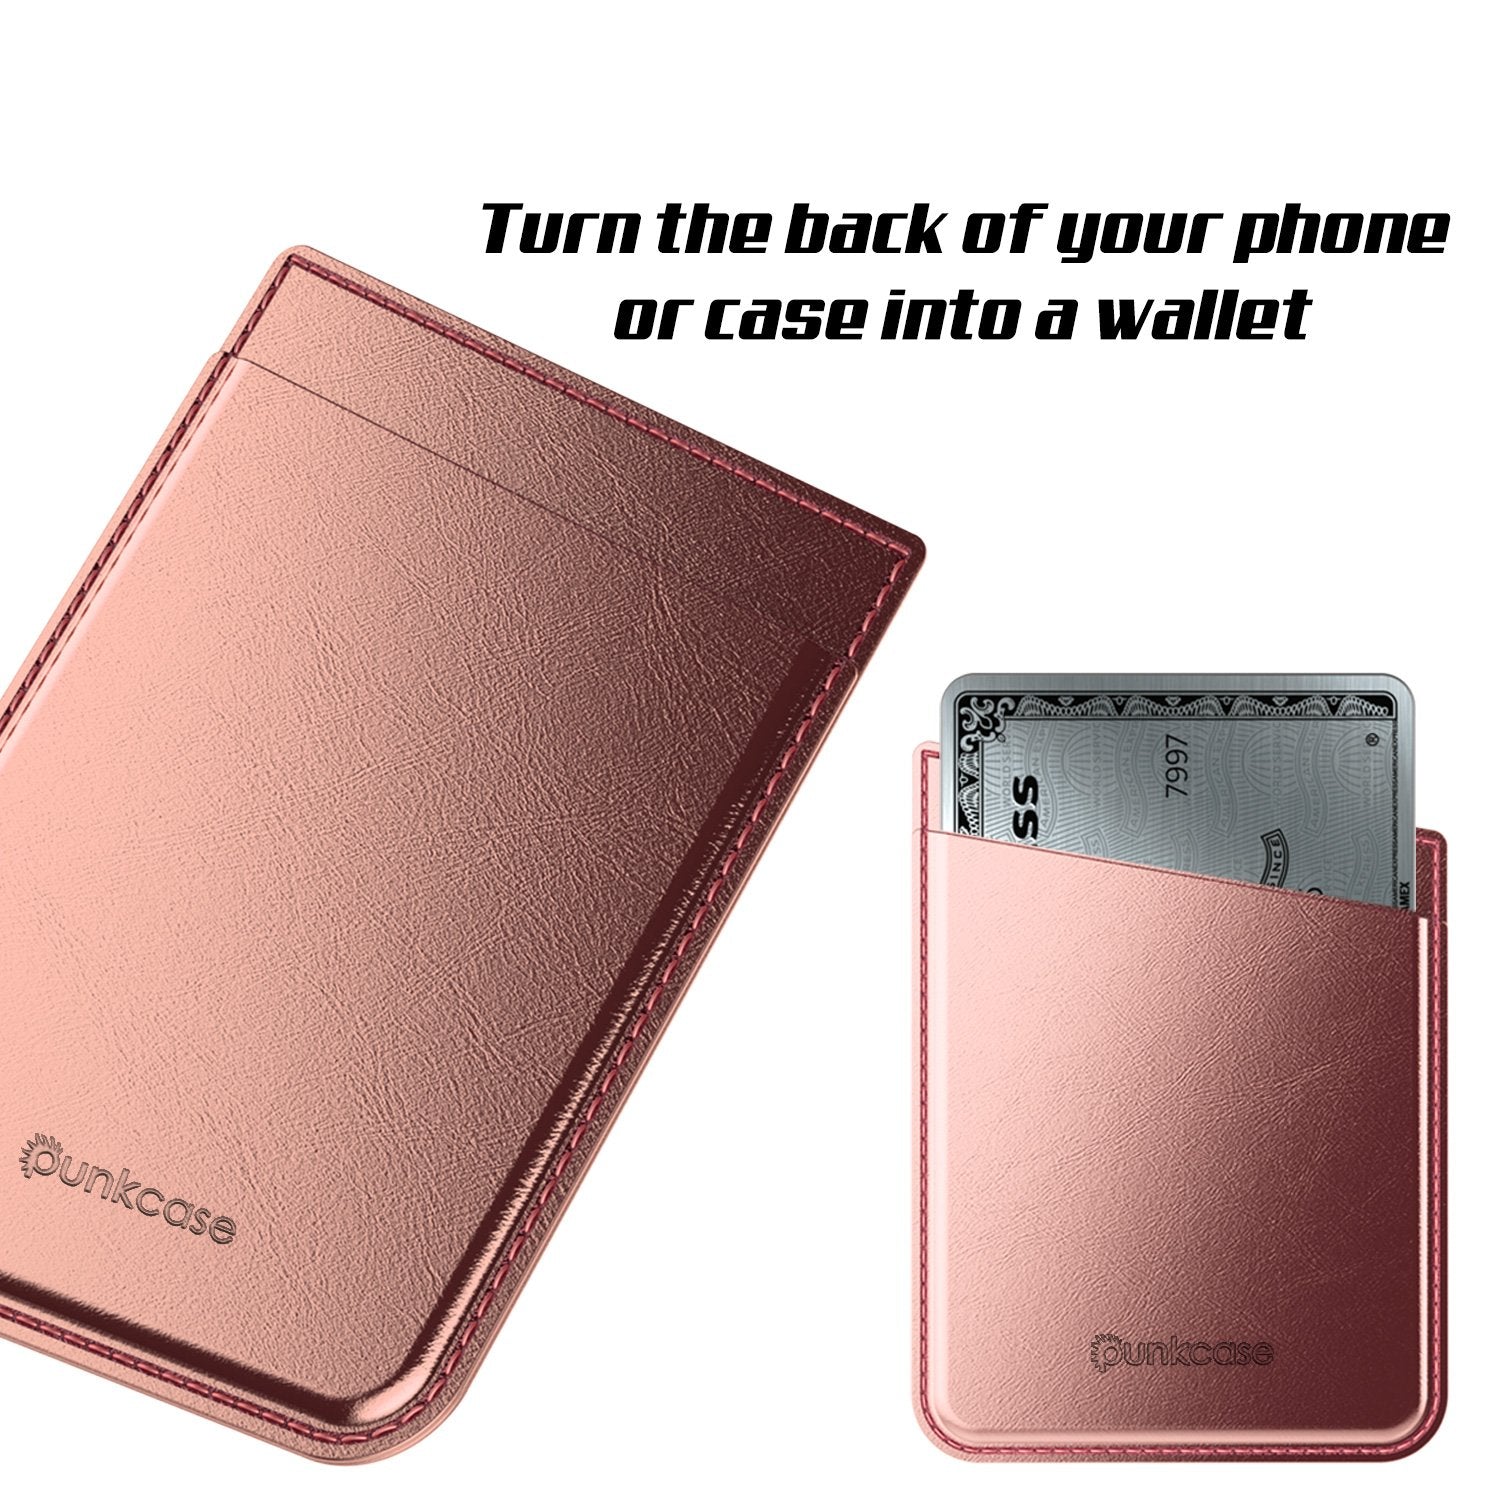 PunkCase CardStud Deluxe Stick On Wallet | Adhesive Card Holder Attachment for Back of iPhone, Android & More | Leather Pouch | [RoseGold]